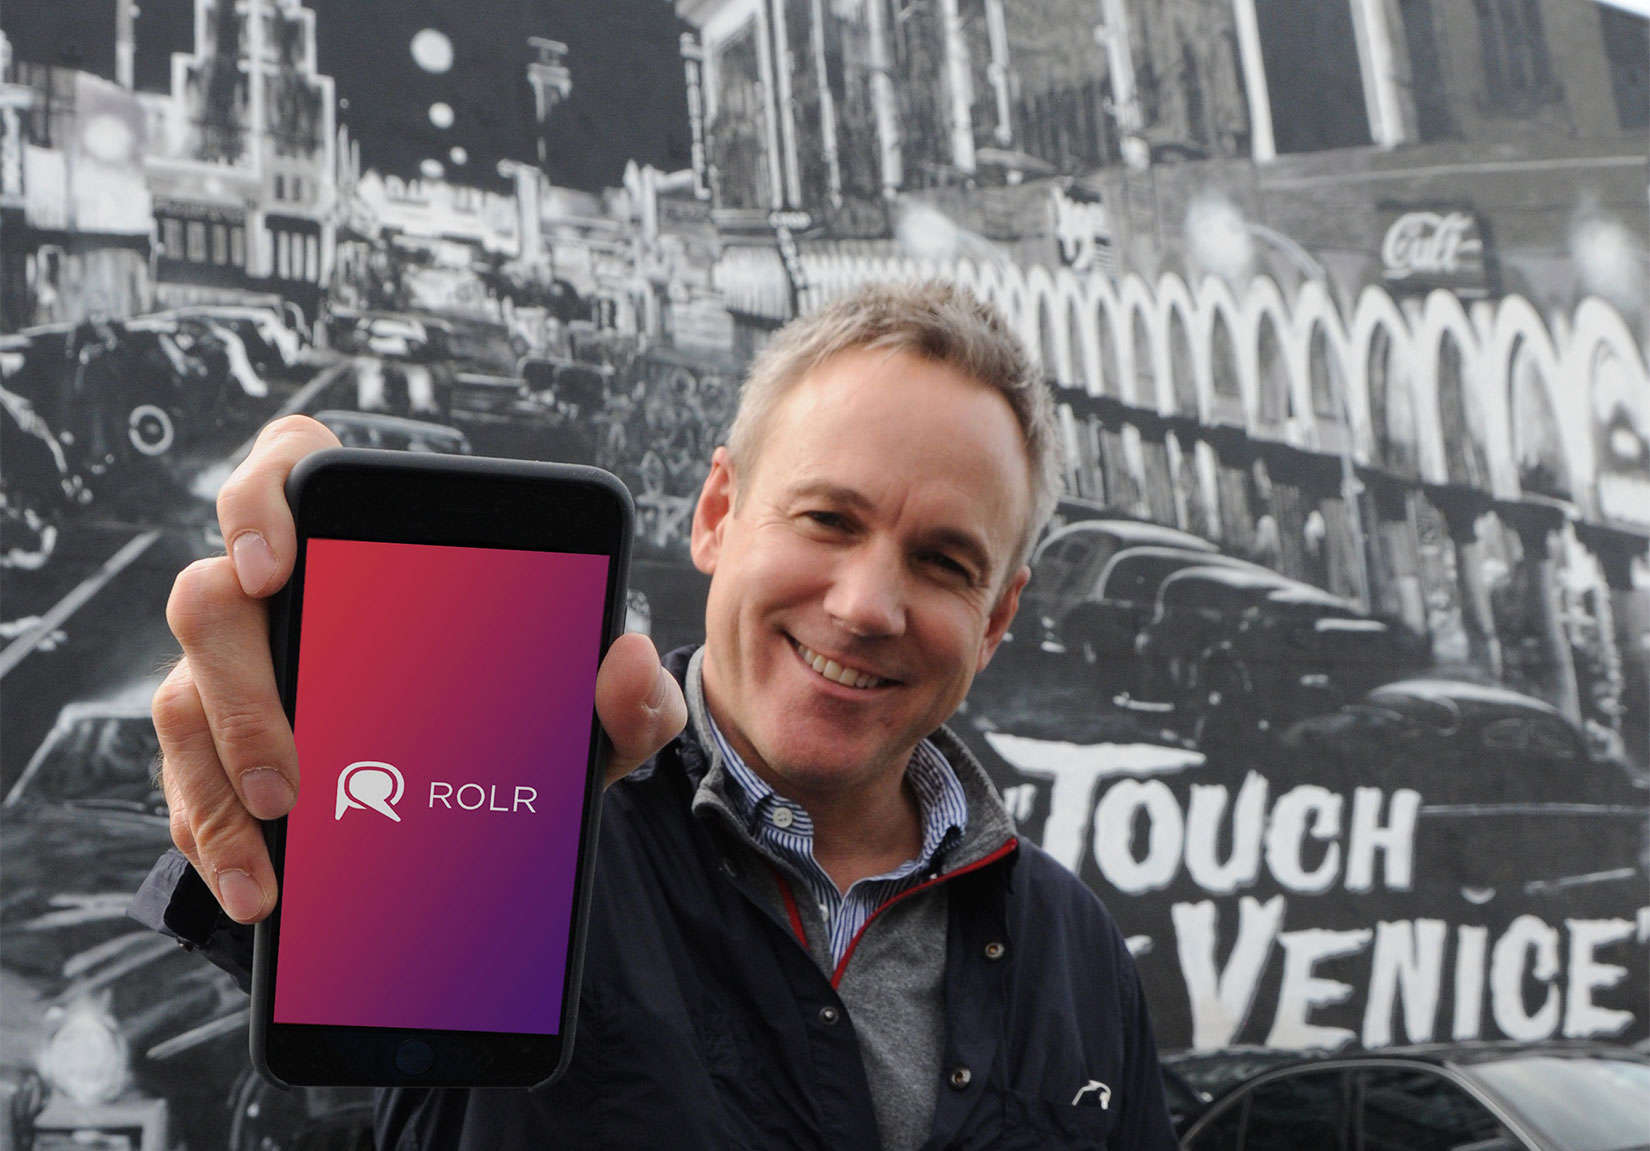 Actor Edward Kerr brings stardom - or just fun - to the small screen with his iOS app ROLR.